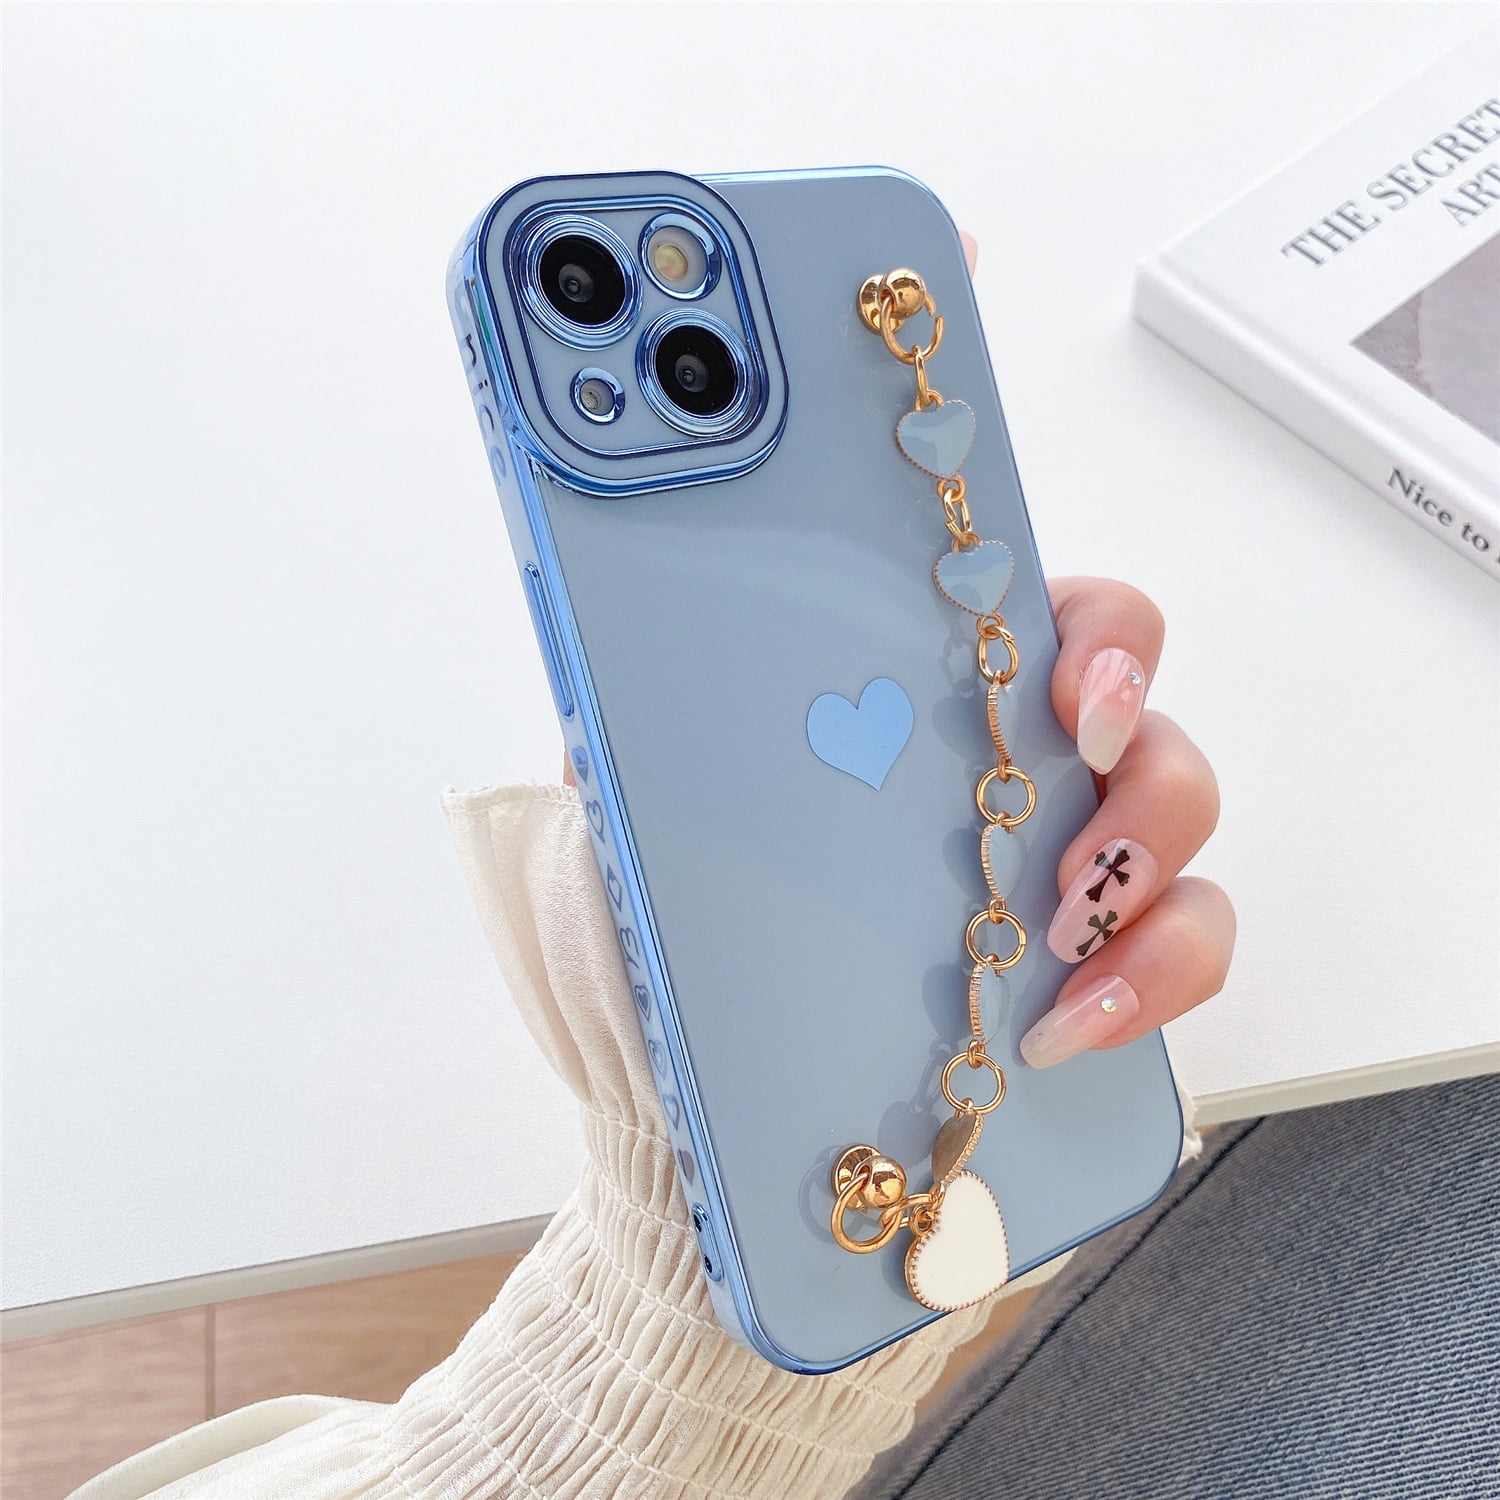 Dteck iPhone 14 Pro Max Case, Shockproof Luxury Plating Soft TPU Silicone  Girls Kids Women Men Protective Case Cover with Round Bracelet for iPhone  14 Pro Max 6.7 inch (2022 Release), White 